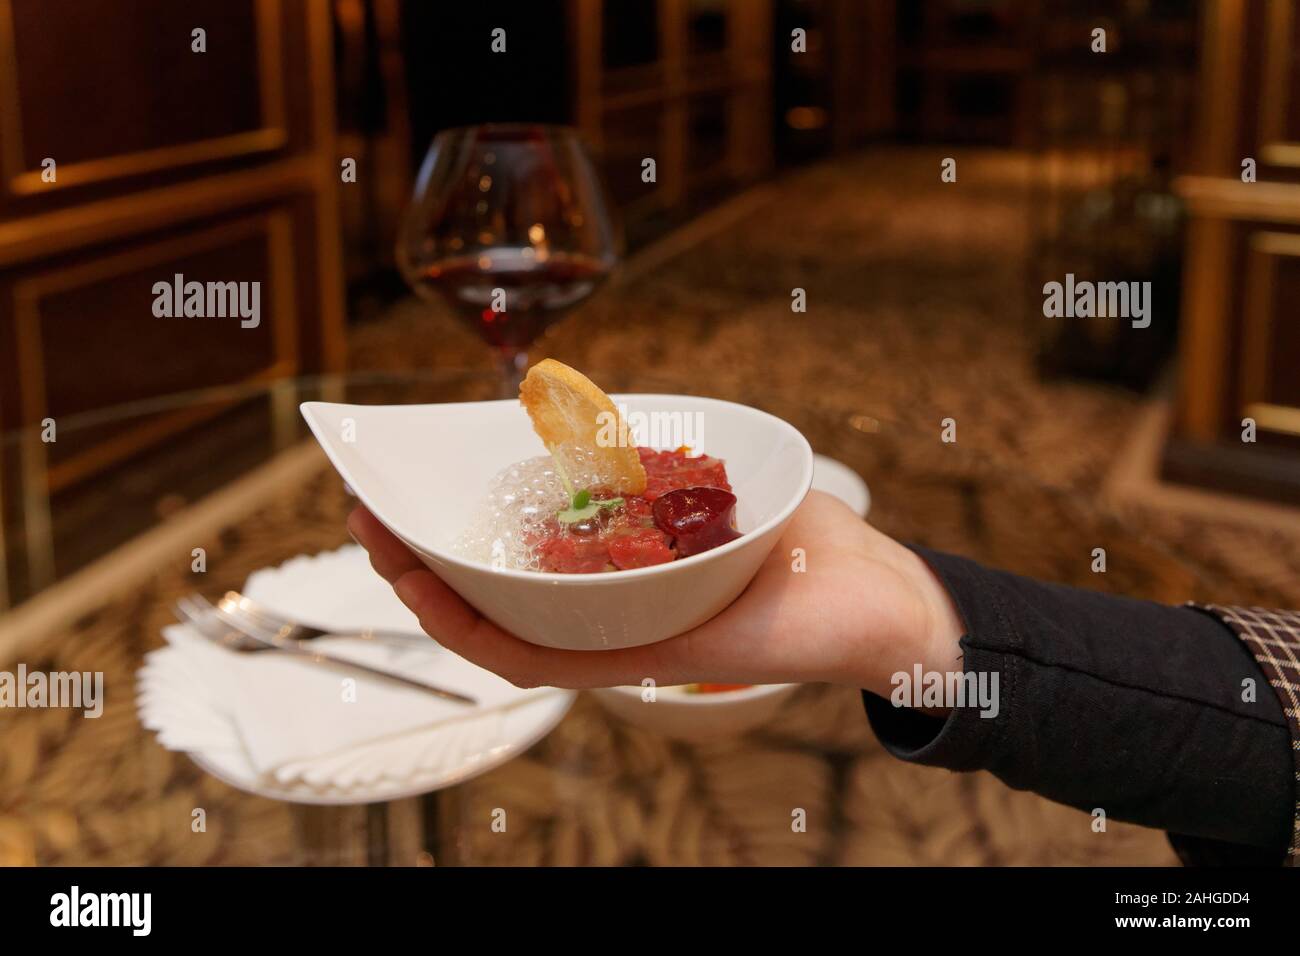 Woman offering steak tartare with molecular froth Stock Photo